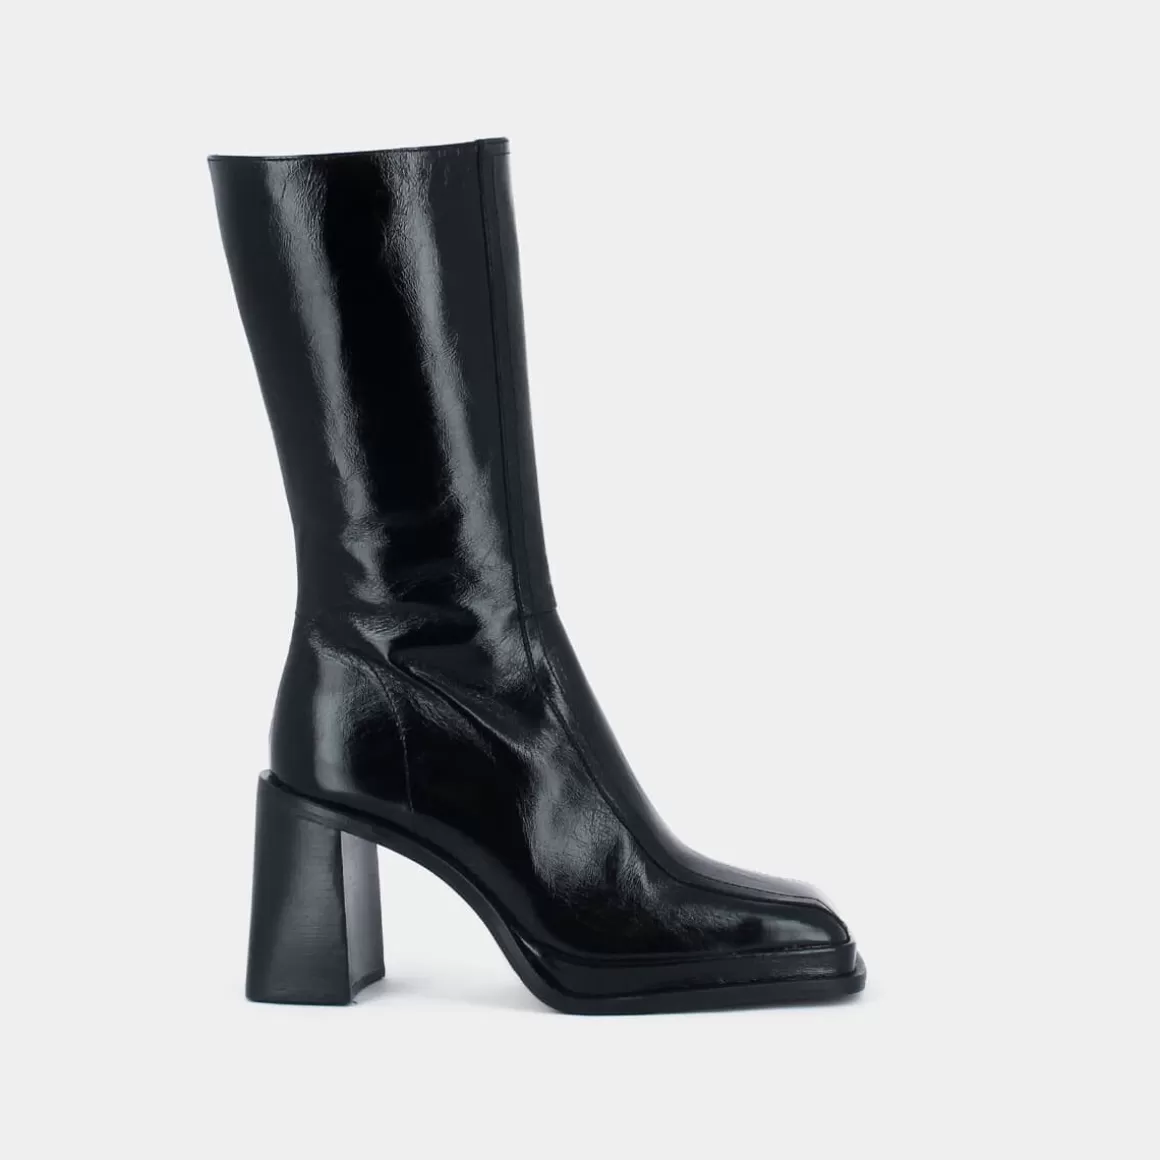 Boots with heel, platform and square toe<Jonak Cheap